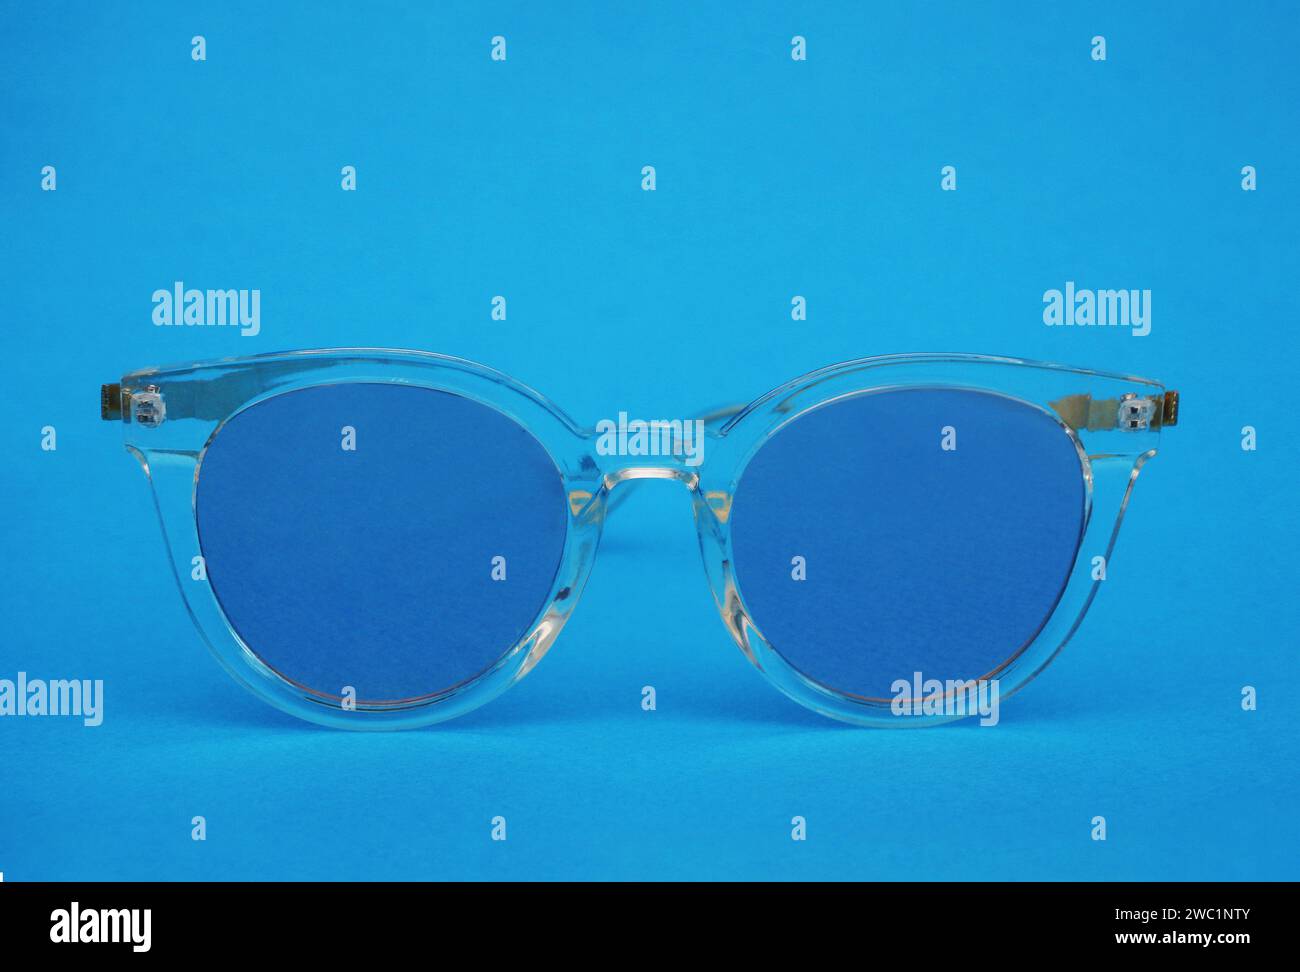 Sunglasses with a transparent frame and blue lenses on a blue paper background. Plastic glasses front view. Stock Photo